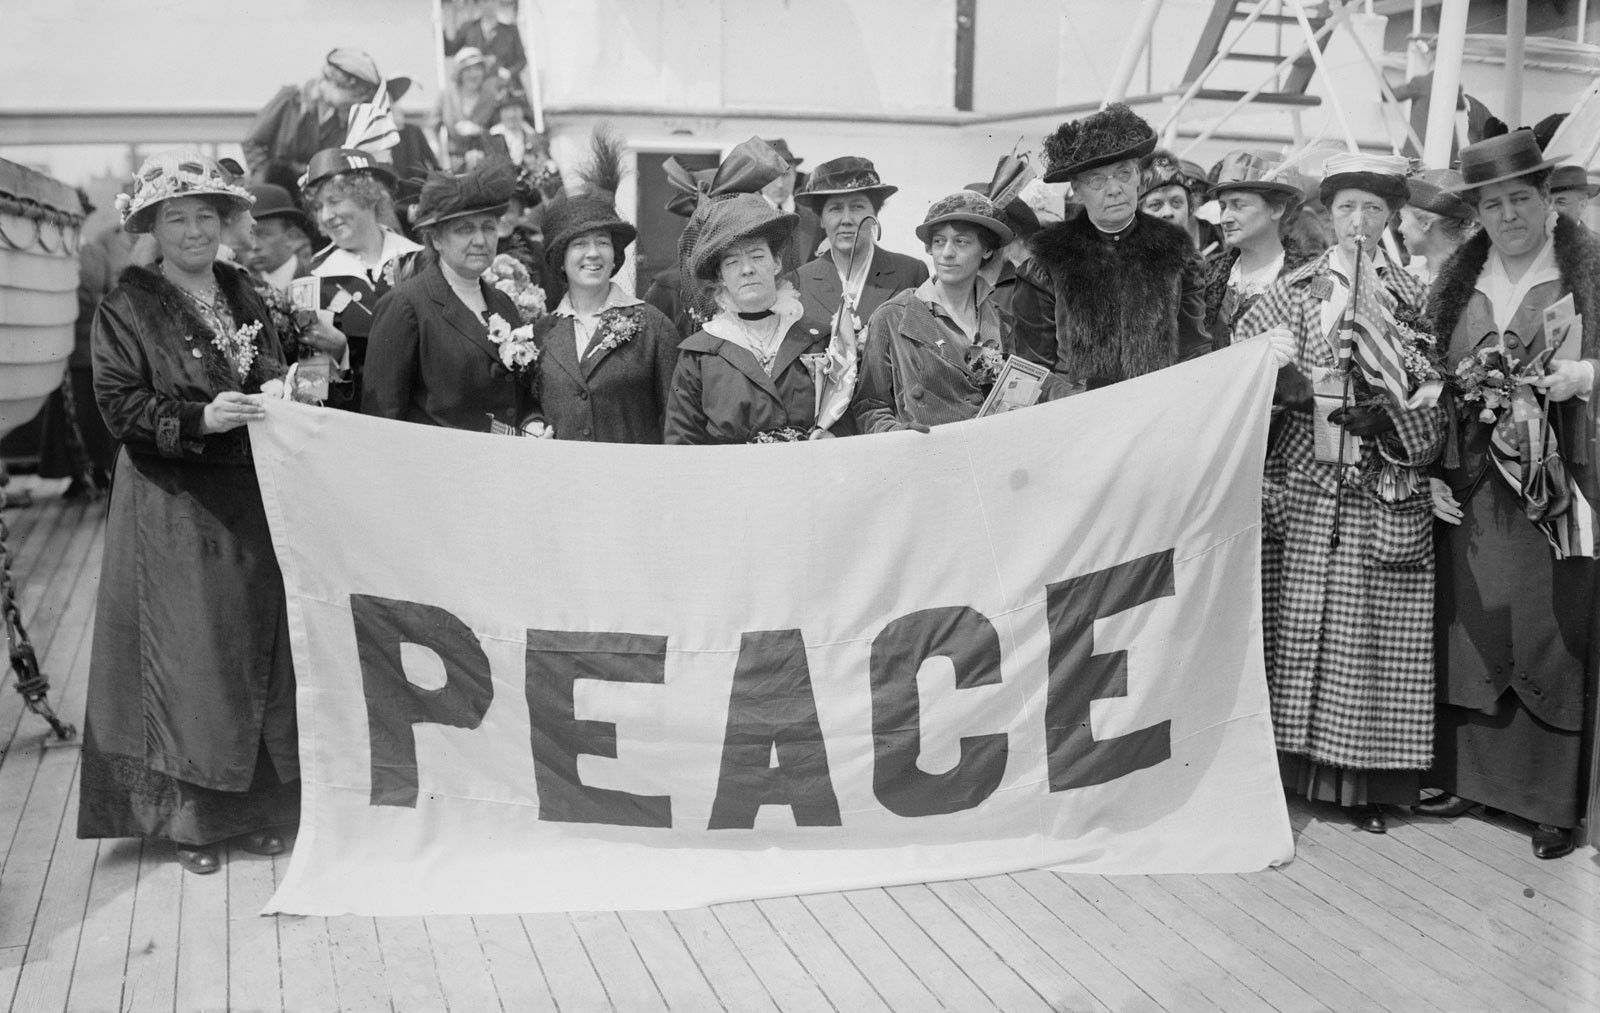 Jane Addams (second from left) and other delegates on the deck of the ship that would take them to The Hague, where the International Women’s Congress (1915) was to be held. LOC (George Grantham Bain Collection (LC-DIG-ggbain-18848) 